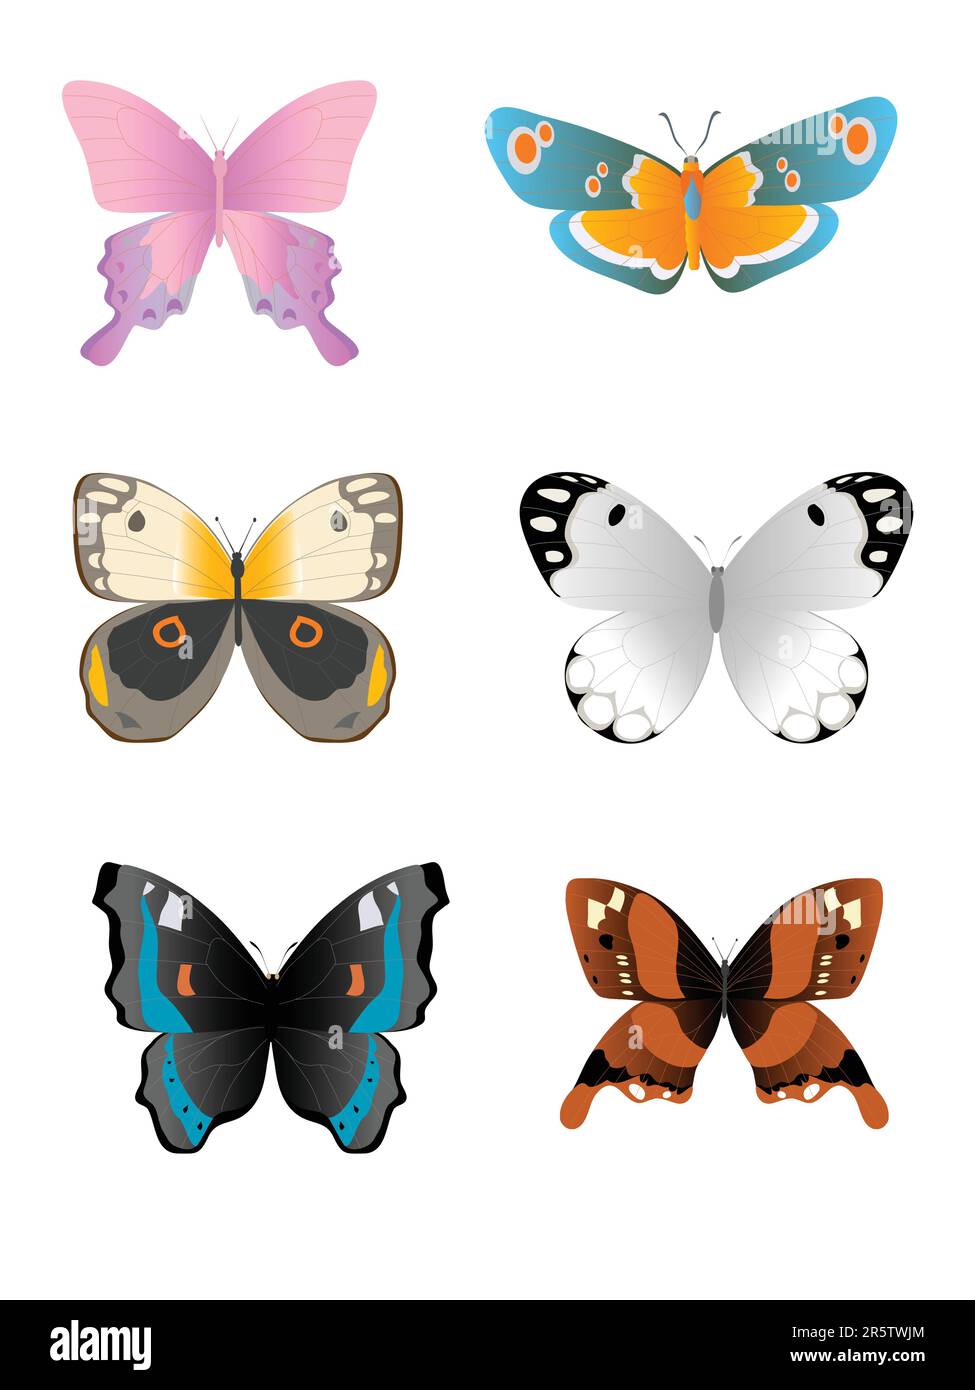 illustration of different color tropical butterflies isolated Stock Vector